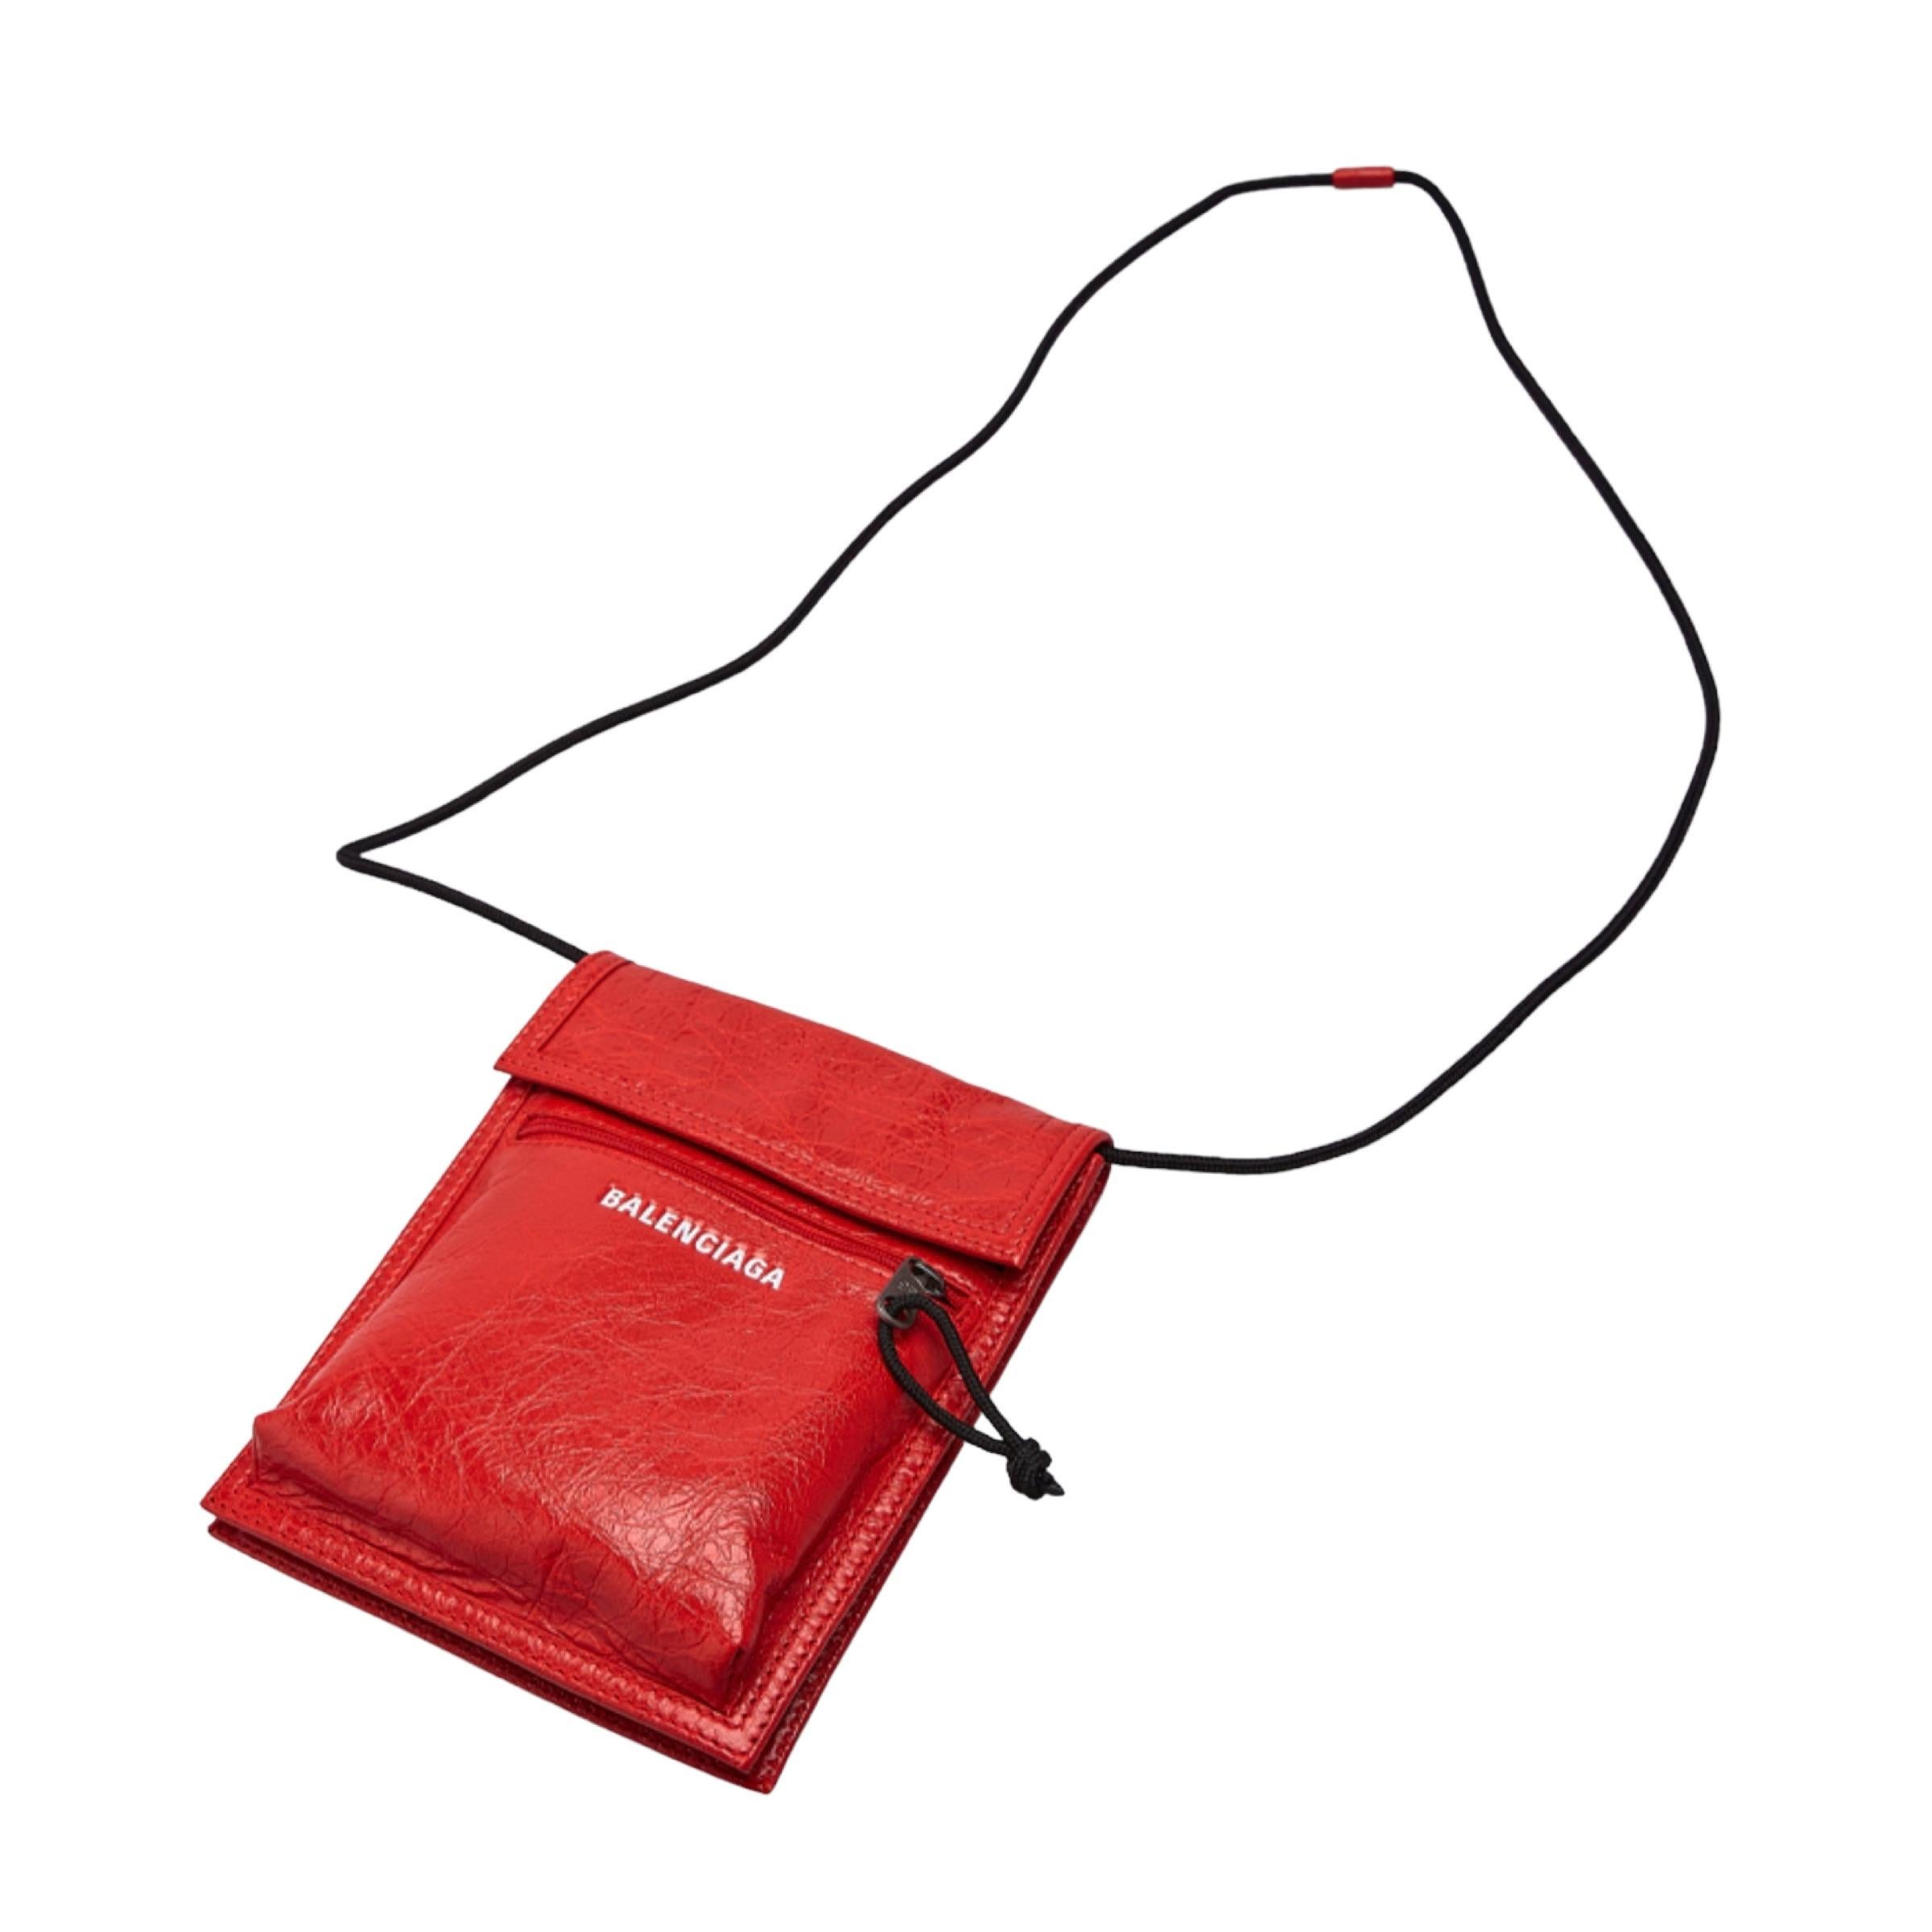 NEW Balenciaga Red Explorer Cracked Leather Pouch Crossbody Bag For Sale 3